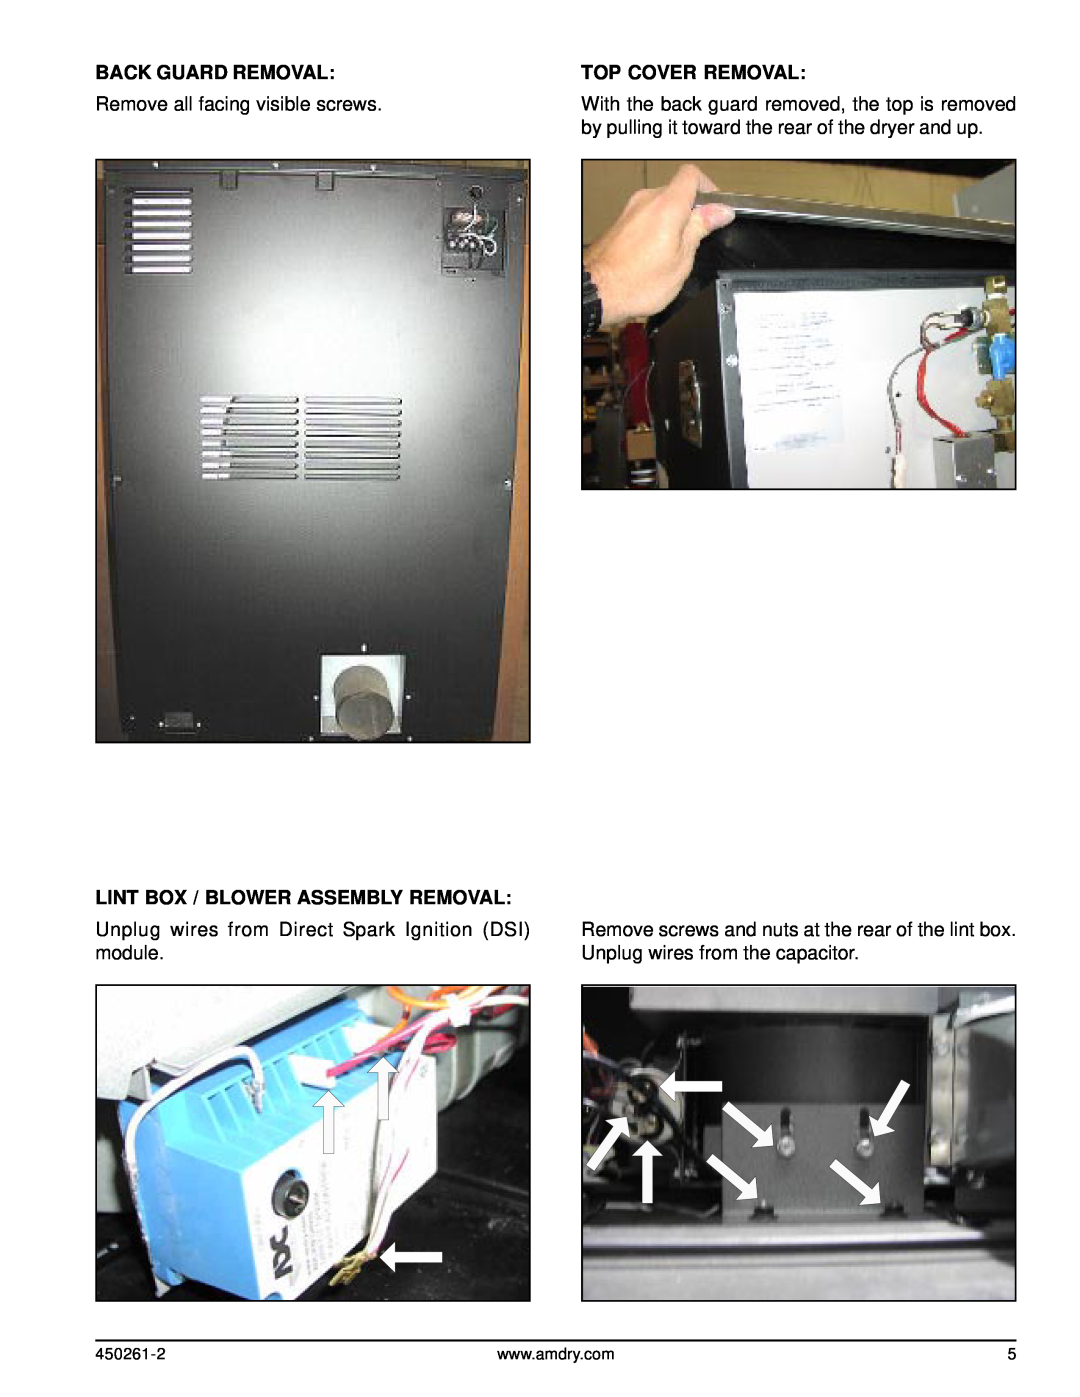 American Dryer Corp CG20, D20 Back Guard Removal, Remove all facing visible screws, Lint Box / Blower Assembly Removal 